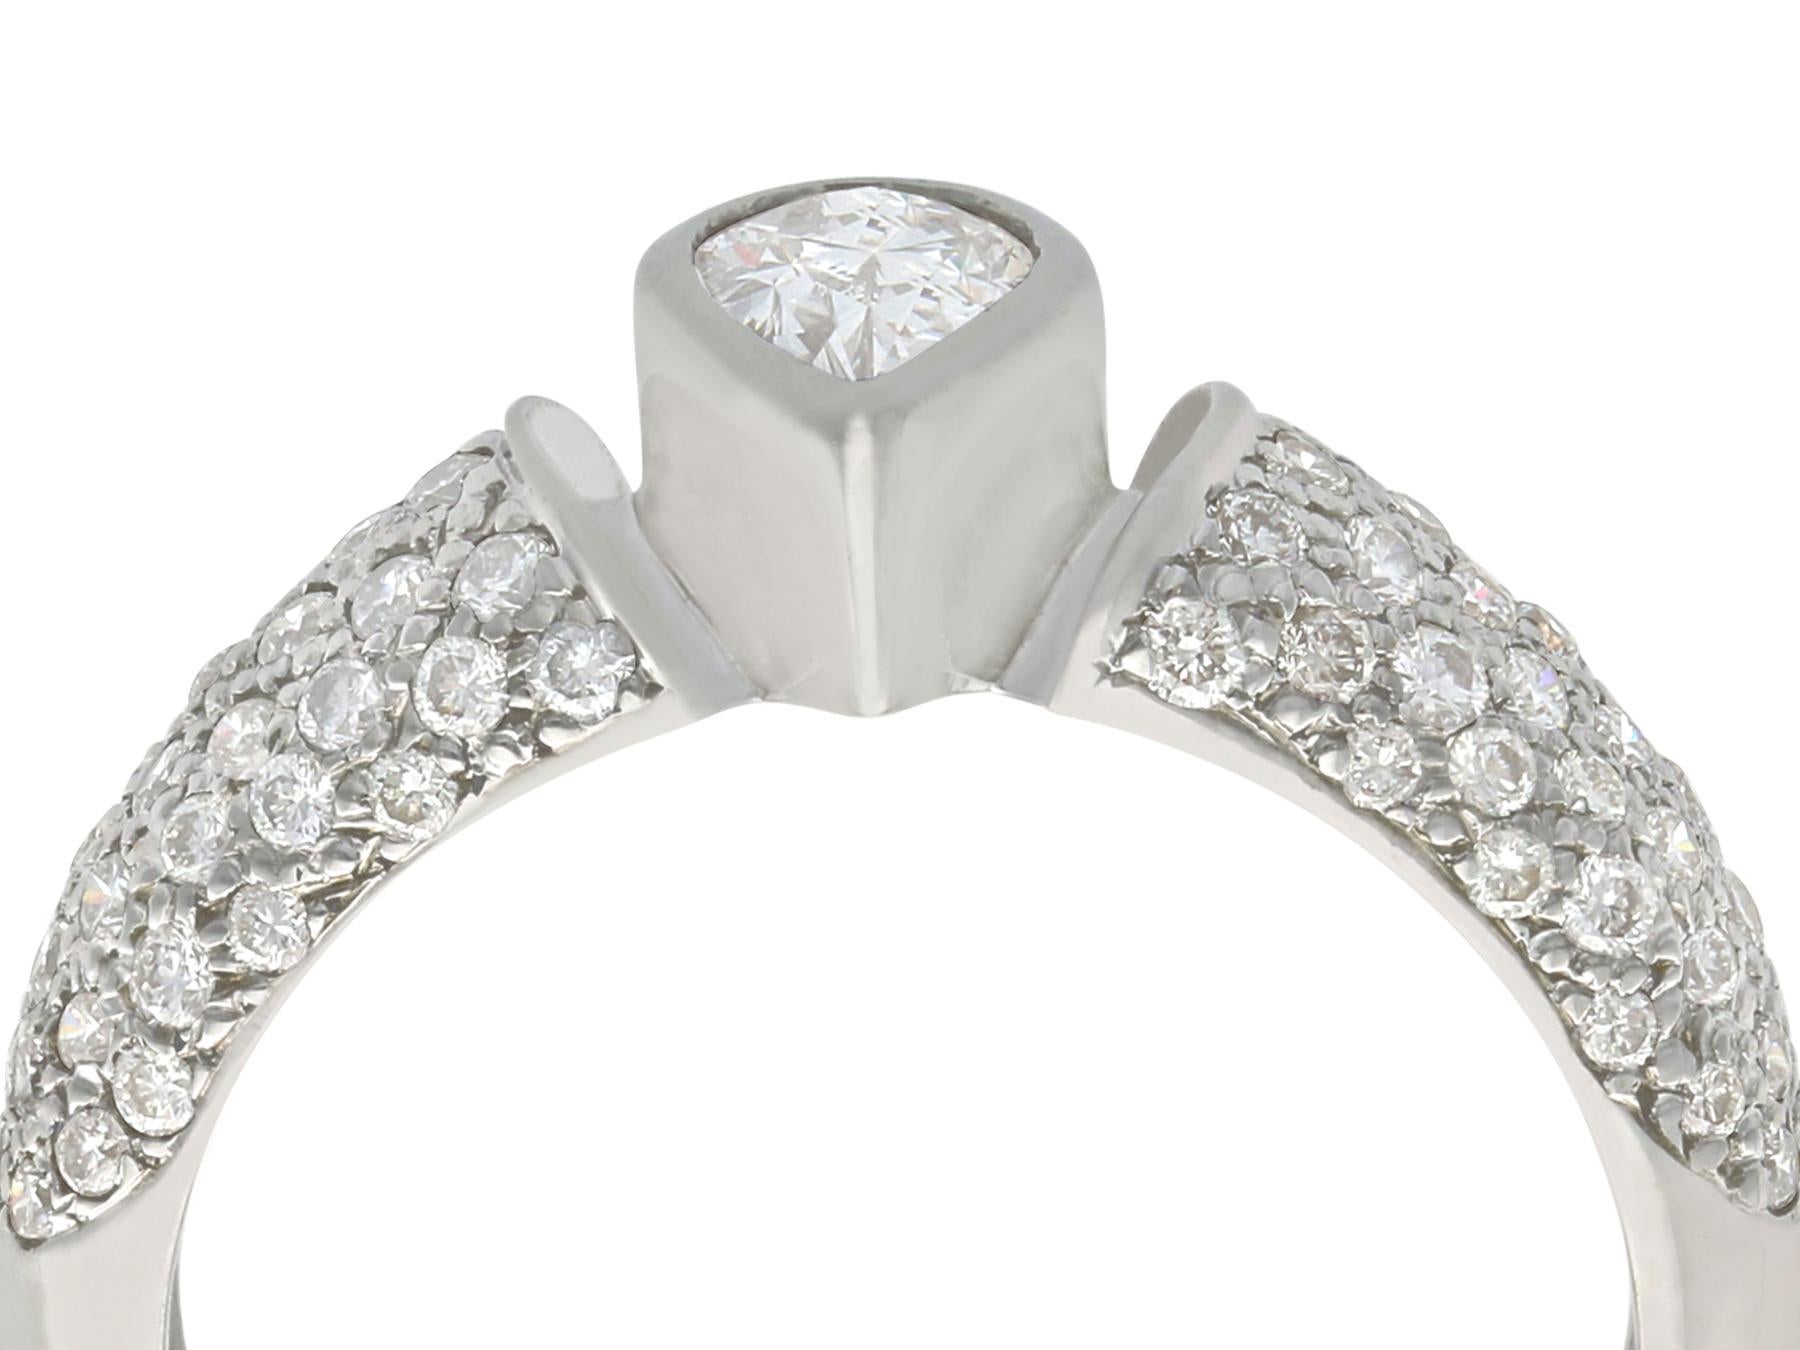 A fine and impressive vintage 1.33 carat diamond and 18 karat white gold dress ring; part of our diverse gemstone jewelry collections.

This fine and impressive vintage diamond band ring has been crafted in 18k white gold.

The ring has a domed